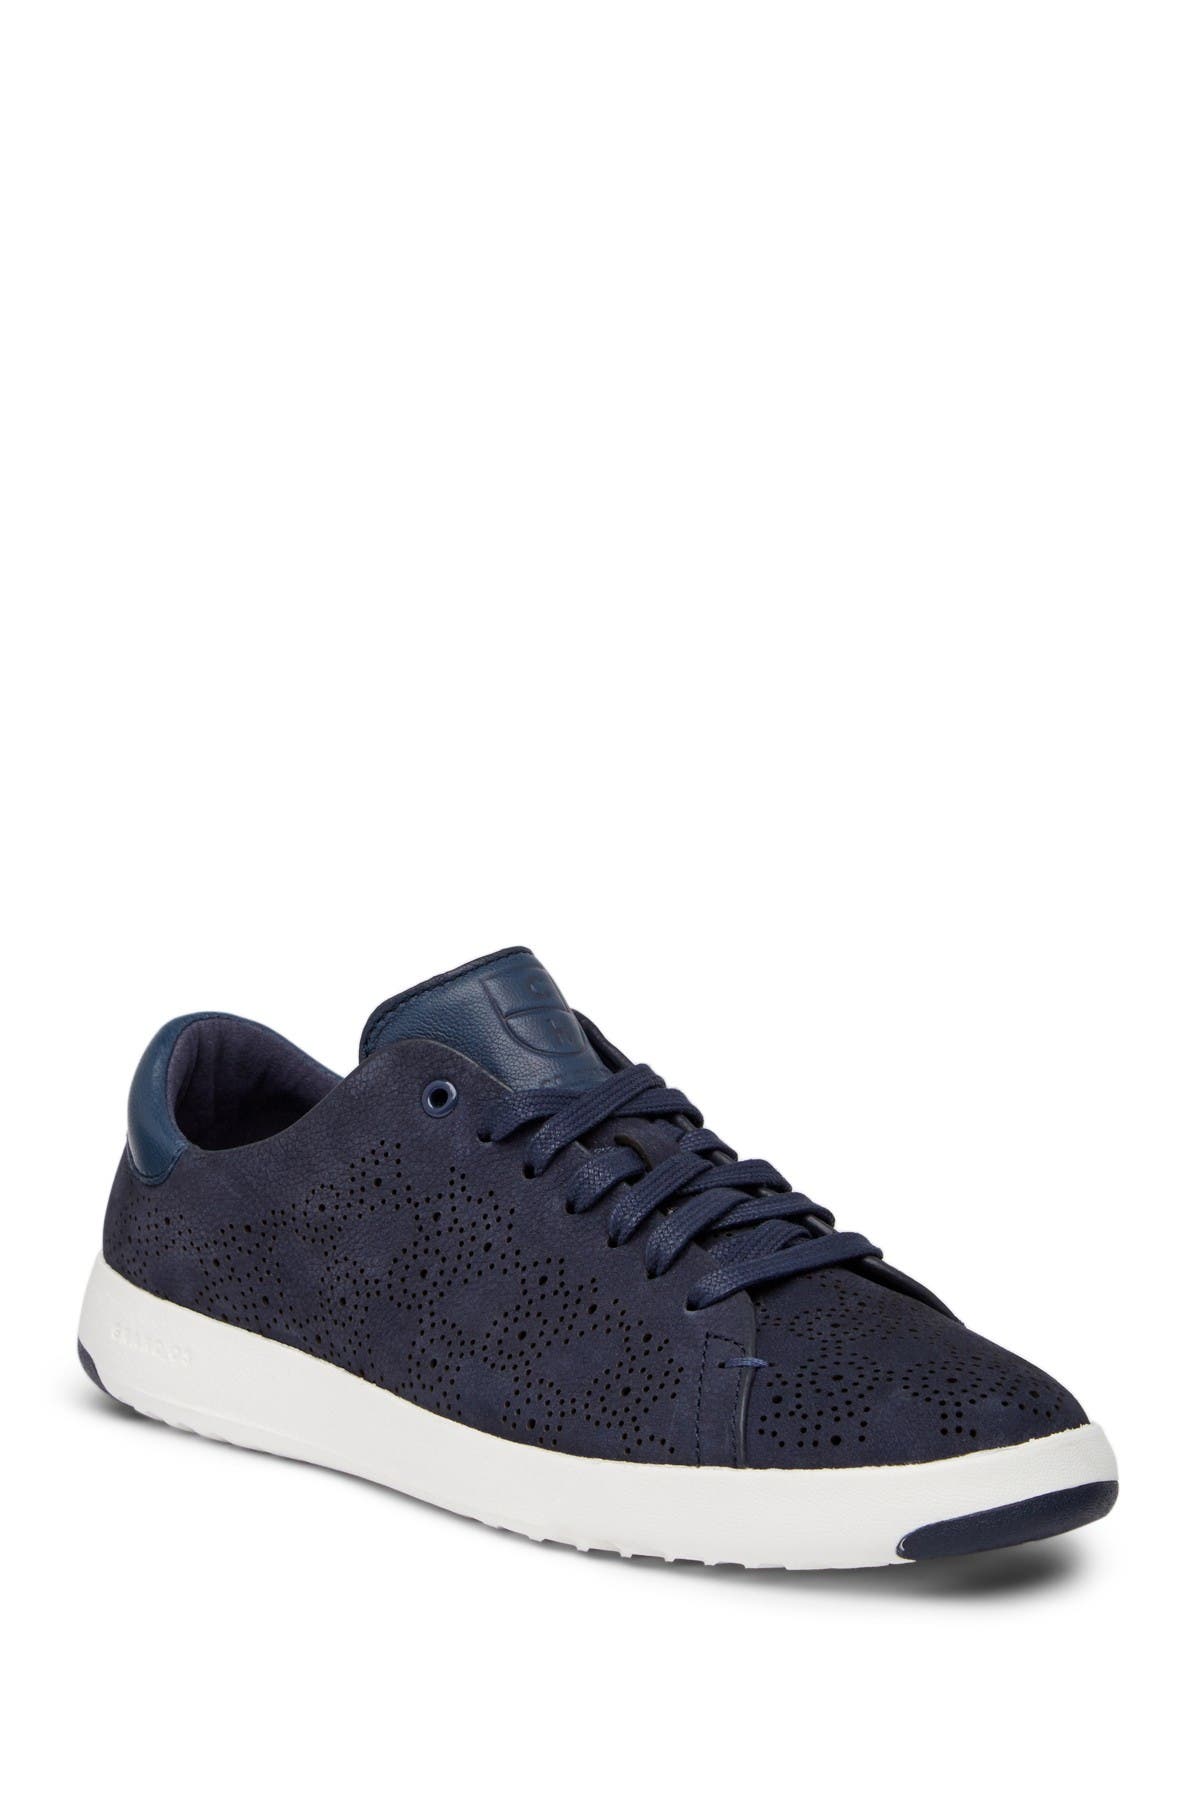 Cole Haan | GrandPro Perforated Sneaker 